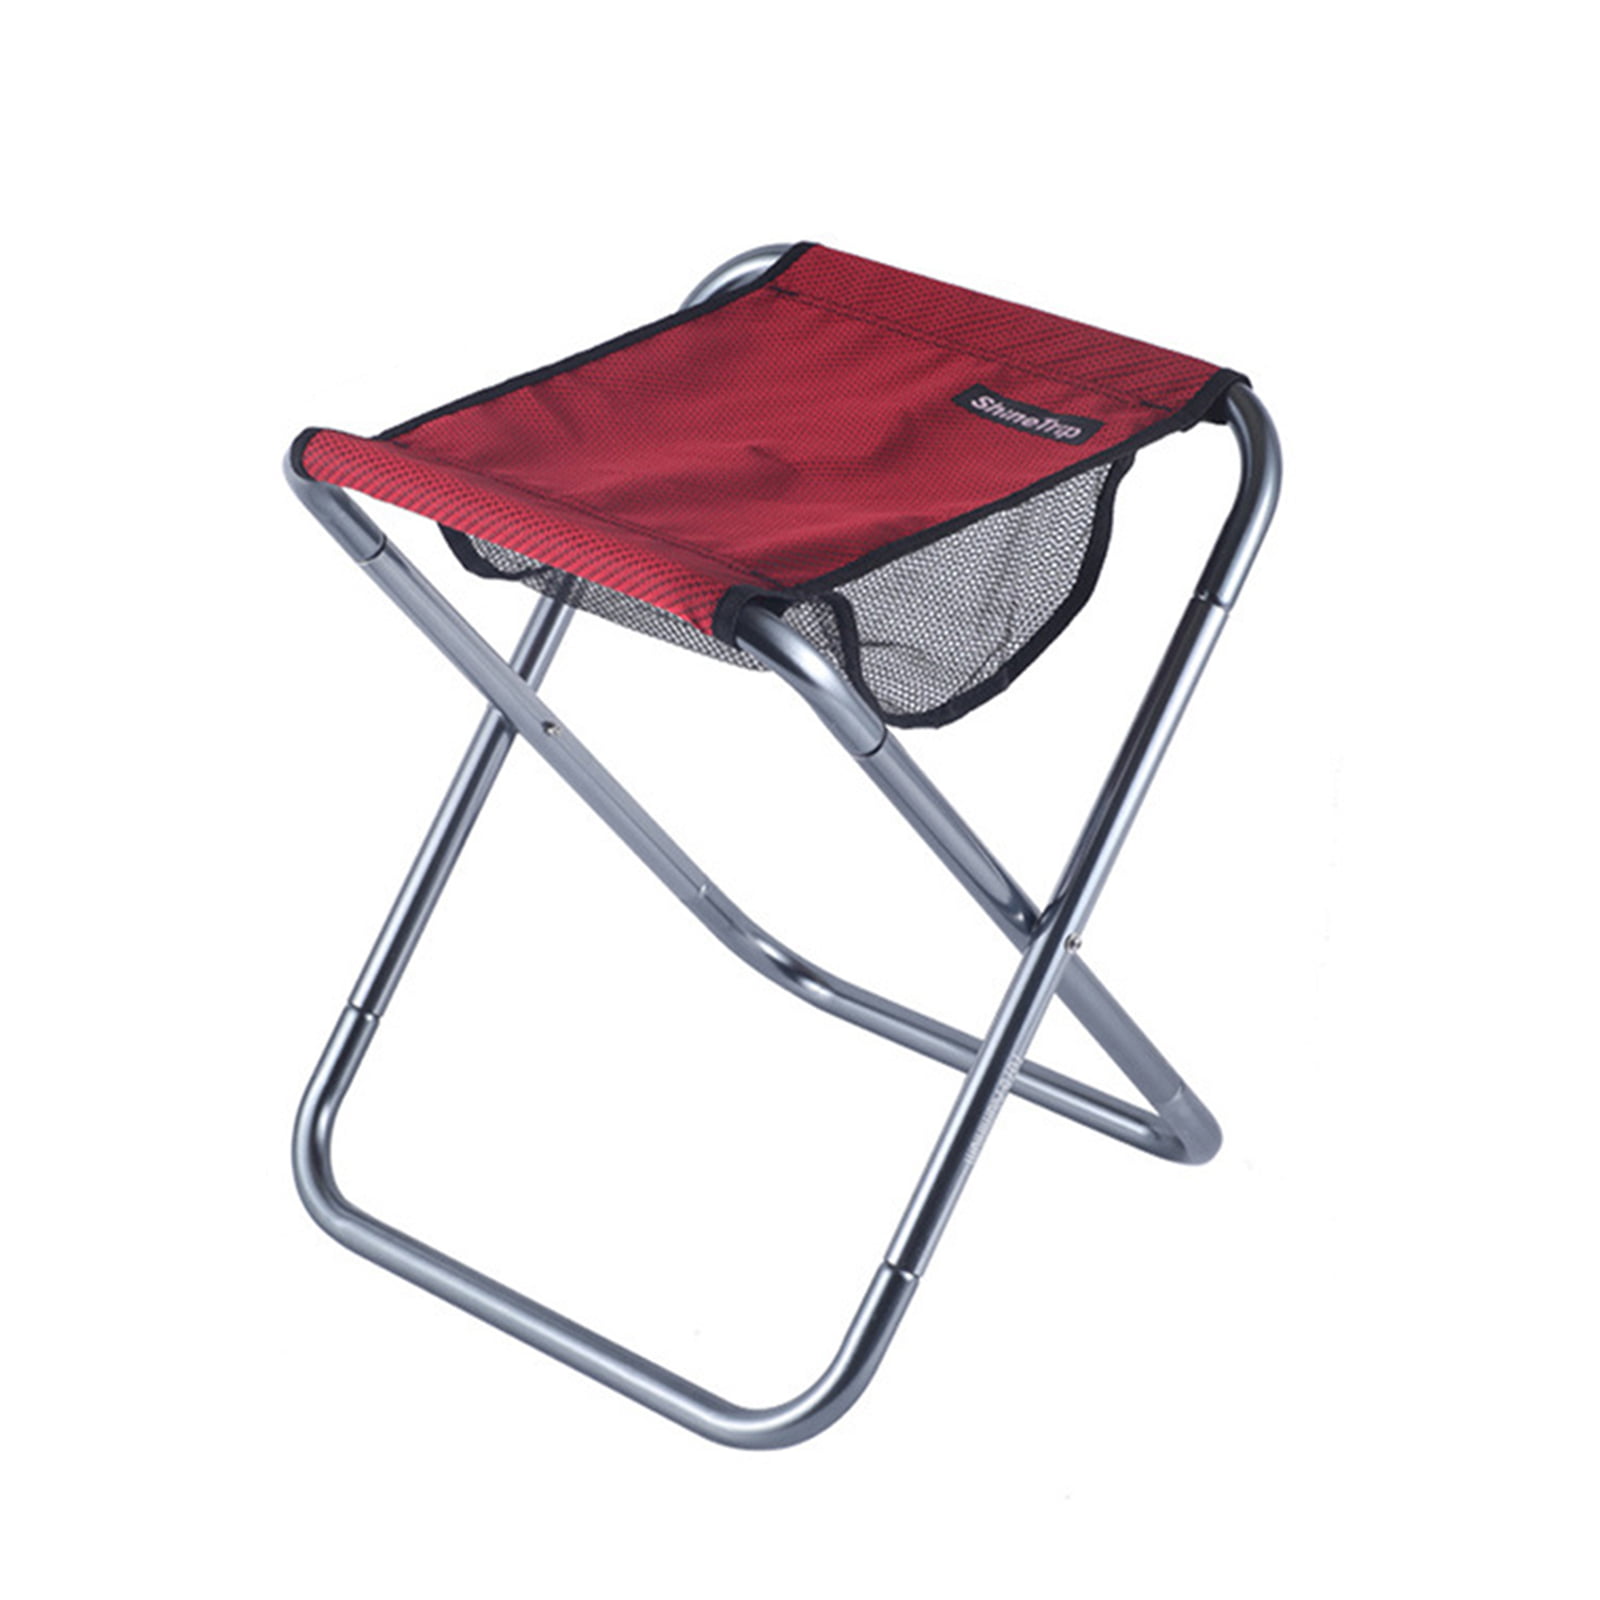 Retractable 150 KG Folding Stool Portable Chair Step stool Fishing outdoor Seat 